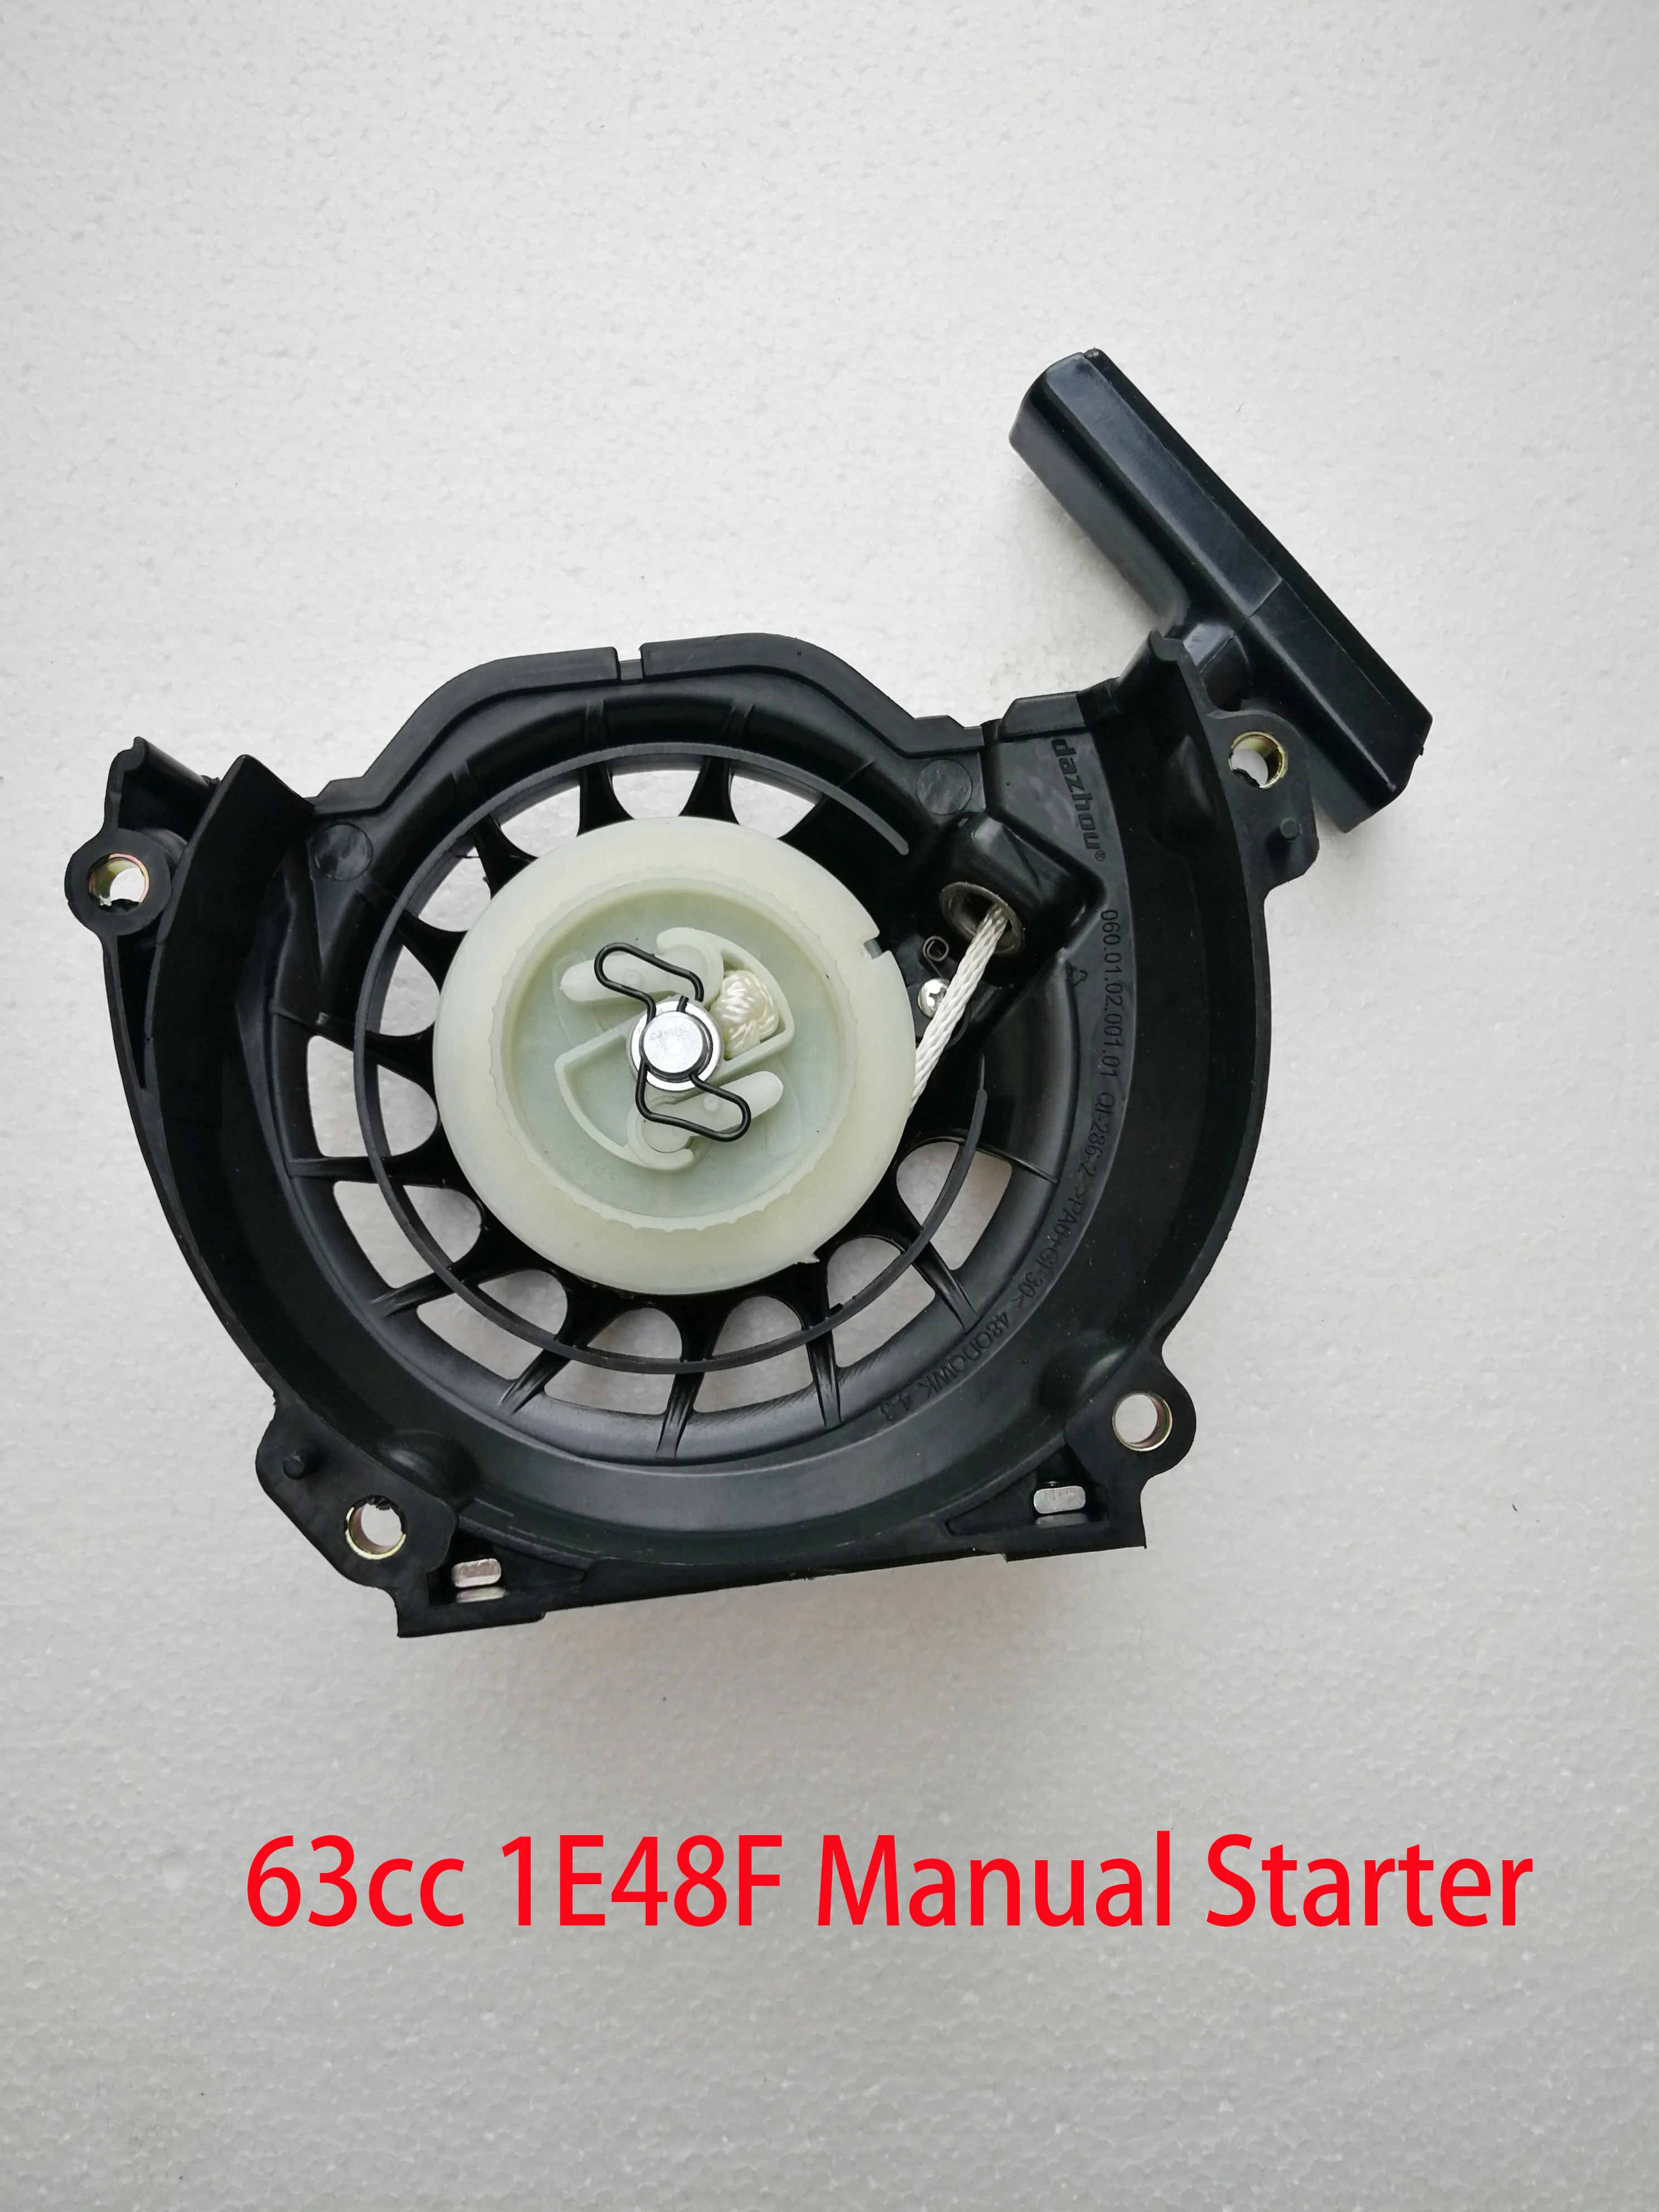 Durable DaZhou Black Color Manual Puller Recoil Starter For 2T GD630 63cc 1E48F 80CC 1E53F Brush Cutter Earth Drill Goped Engine pvc stripe fabric color for manual control caravan roll out caravan awning